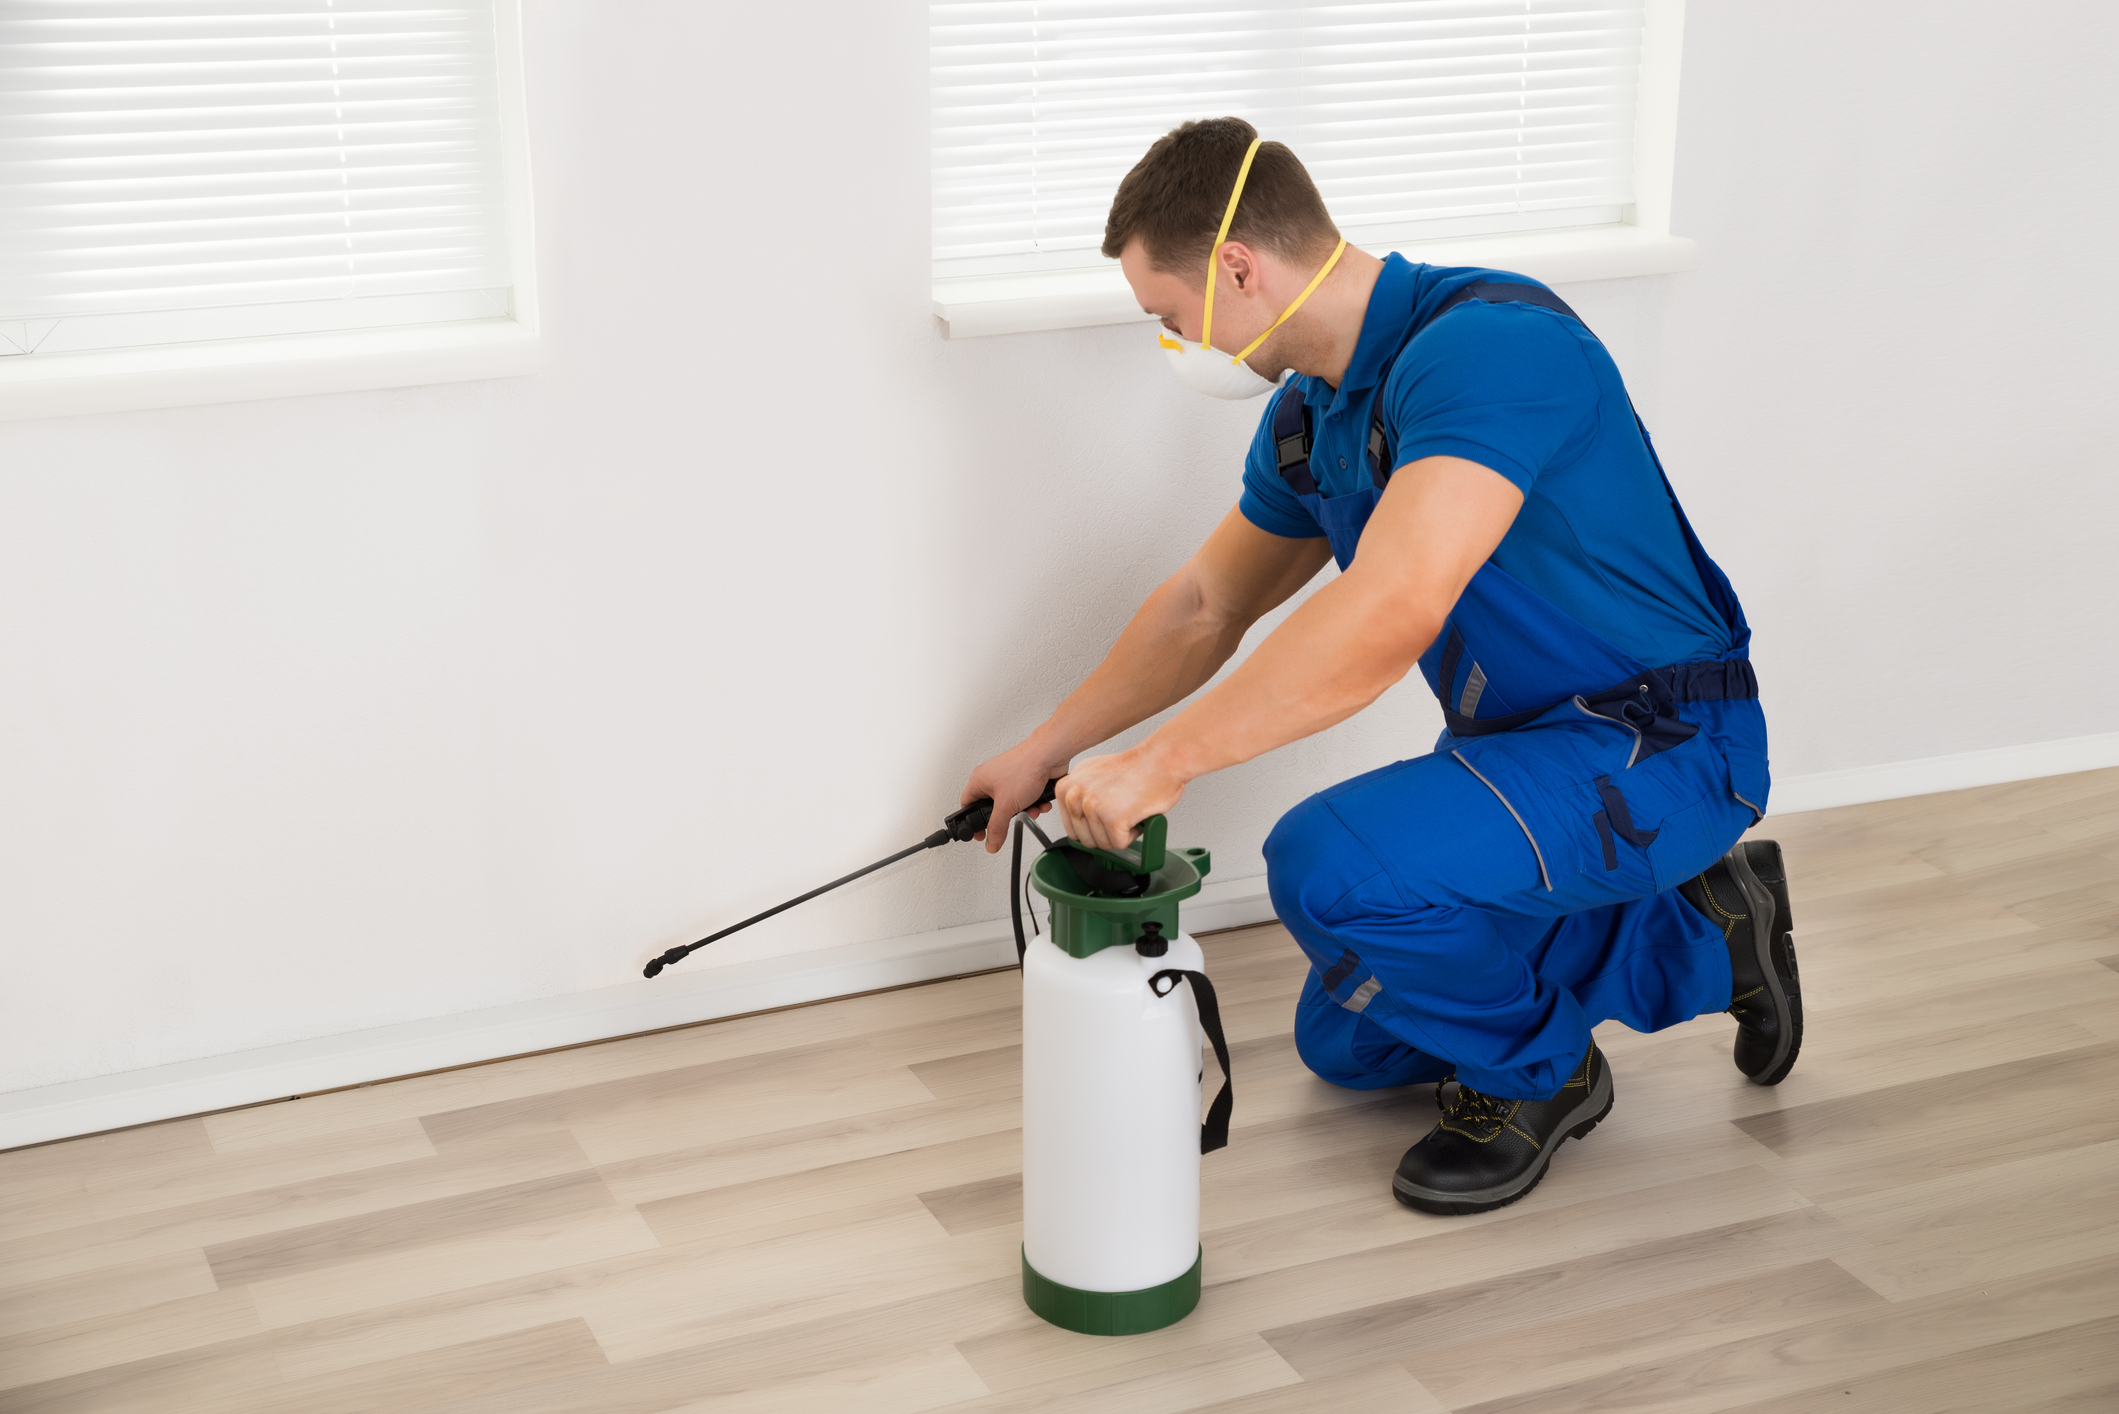 Pest control professional spraying pesticide along the wall inside of a house. 

